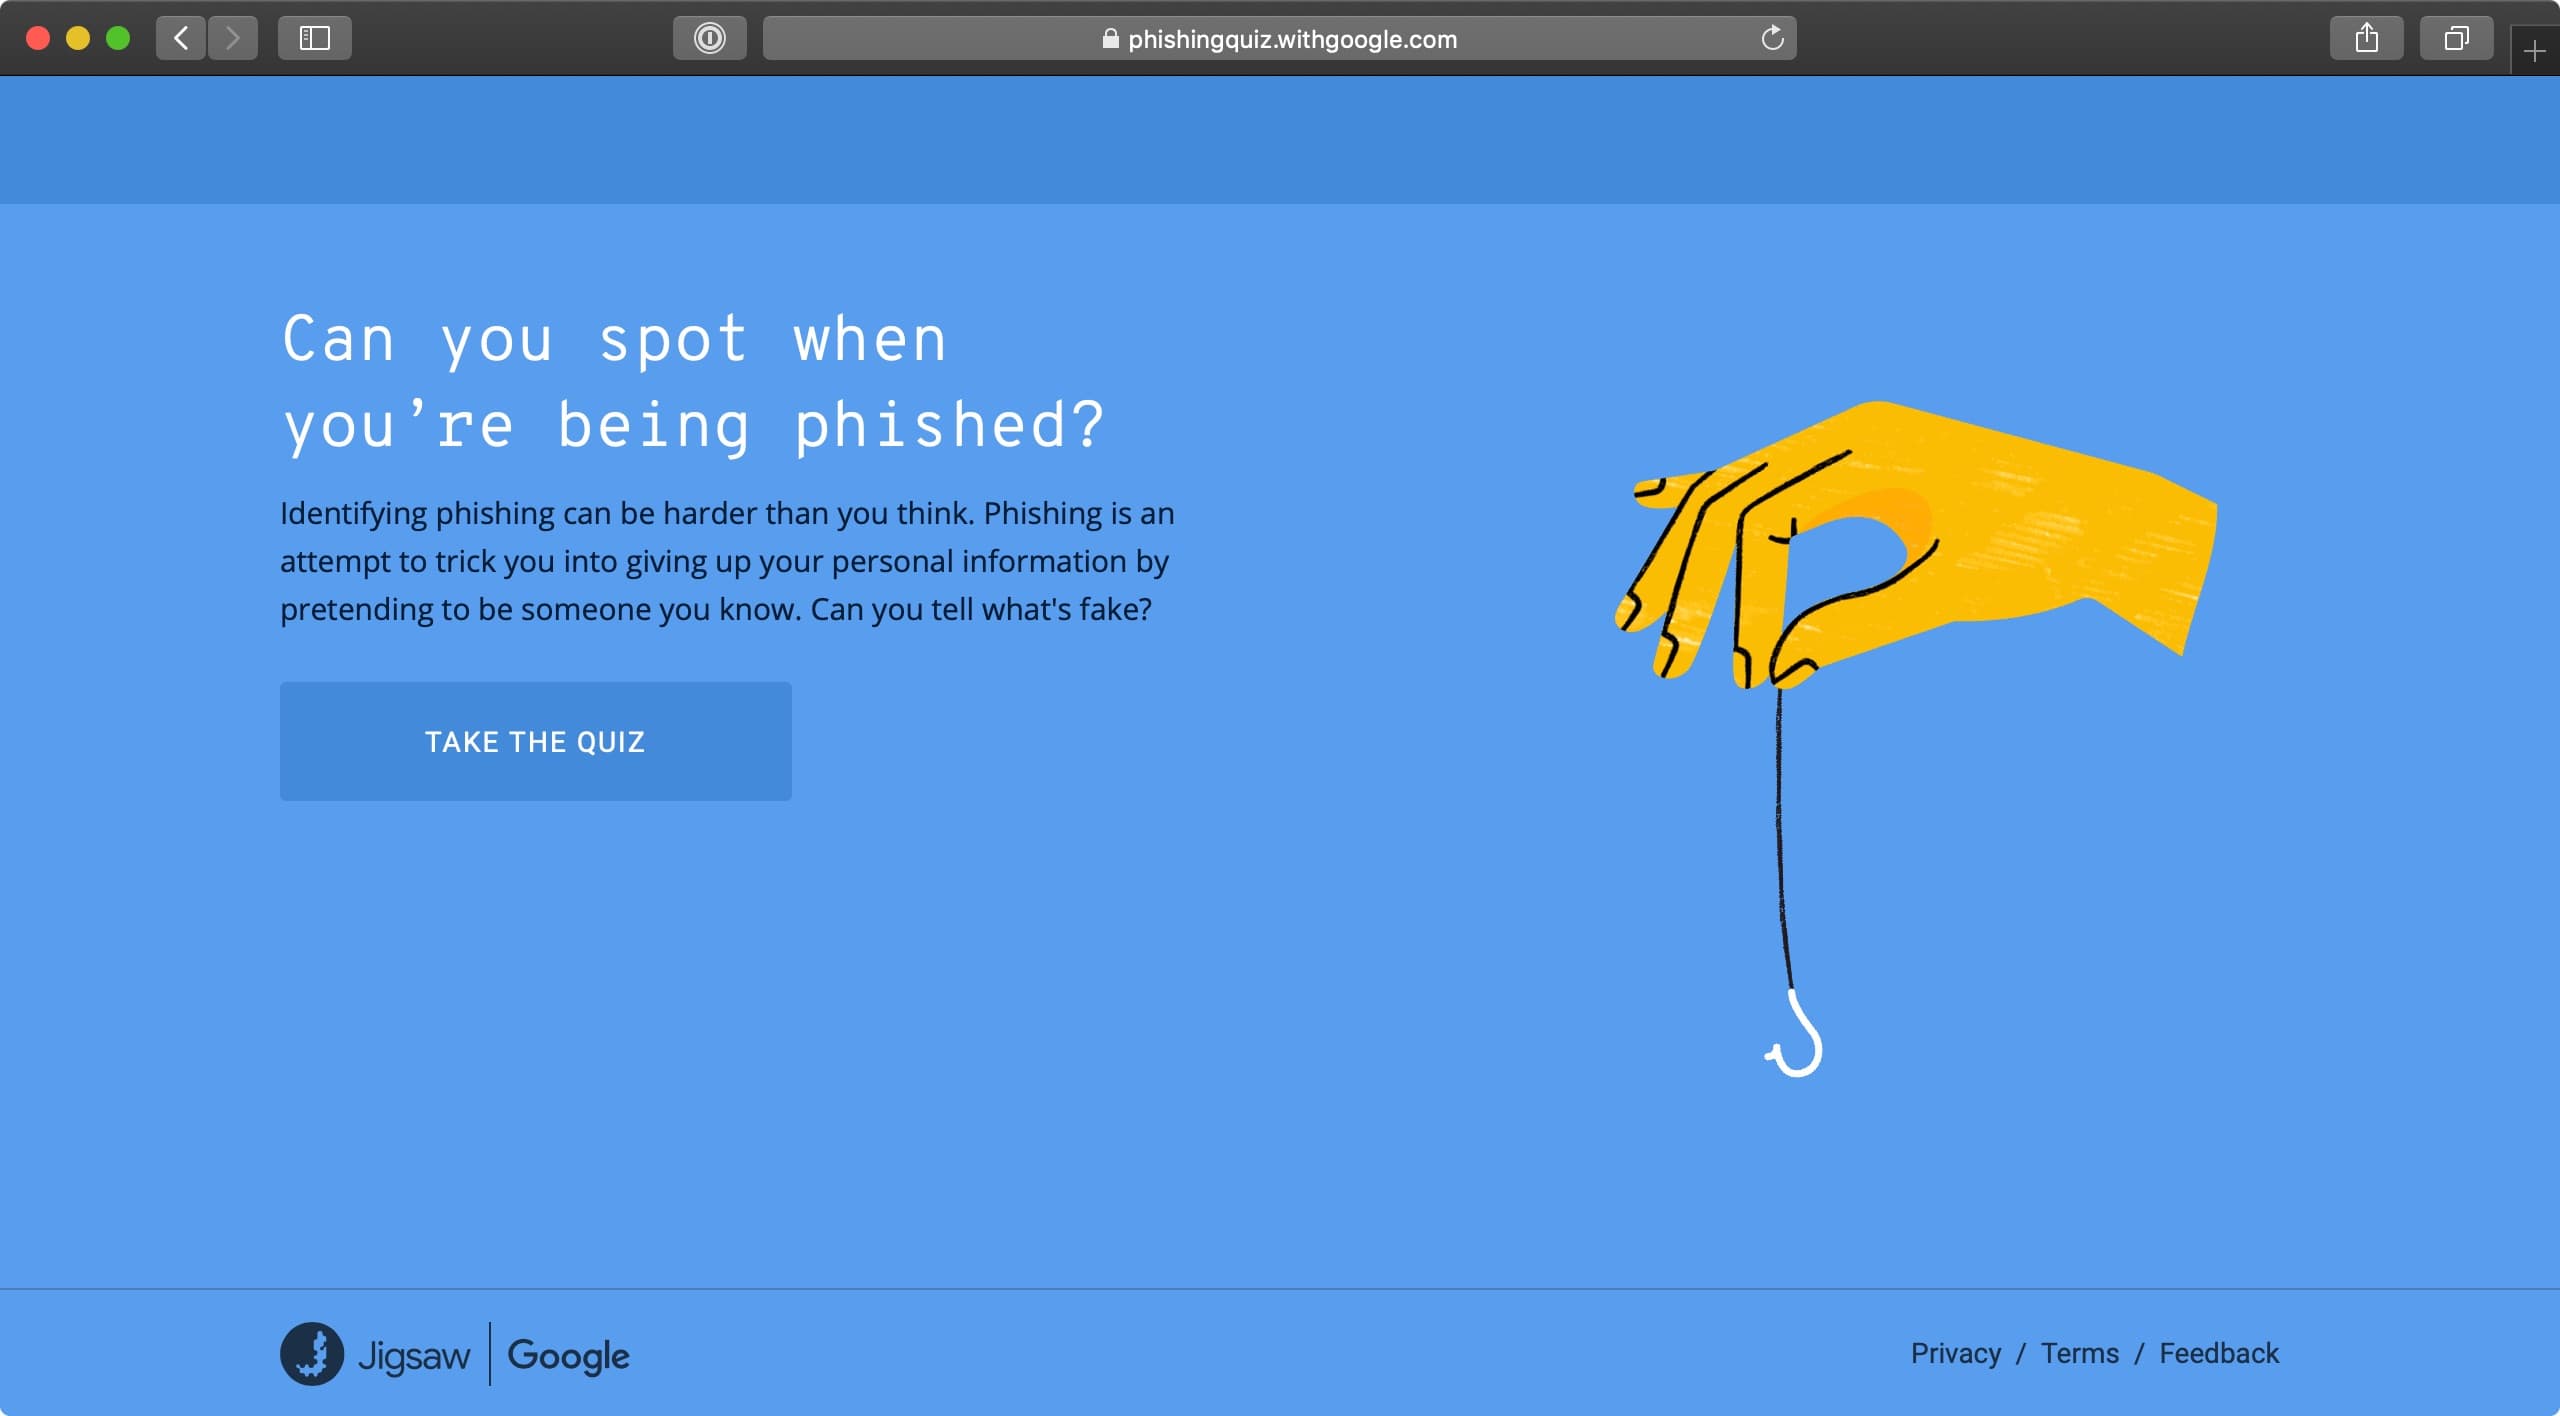 LinkTipp: Can you spot when you’re being phished?